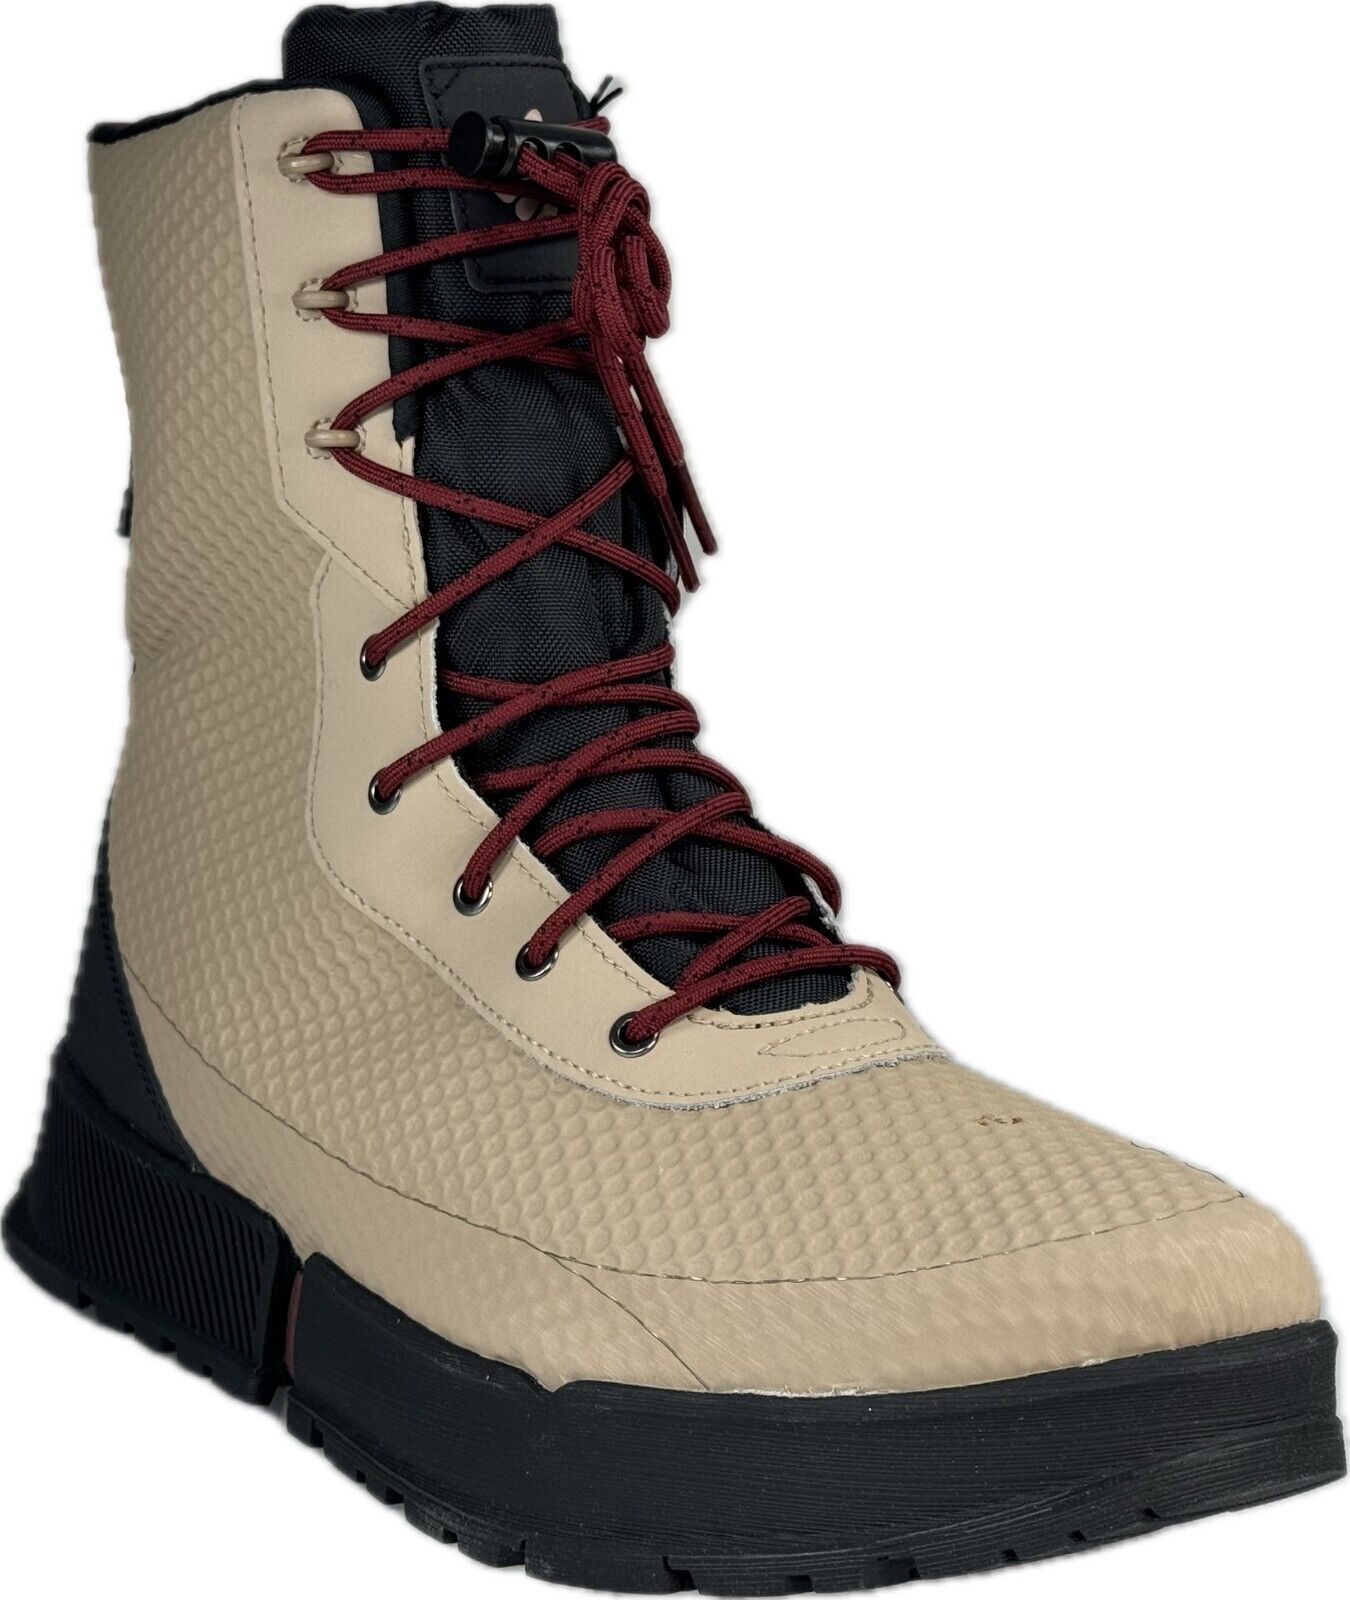 Primary image for Columbia Men's Hyper-Boreal Omni-Heat Tall Snow Boots SZ 13, BM0127-212